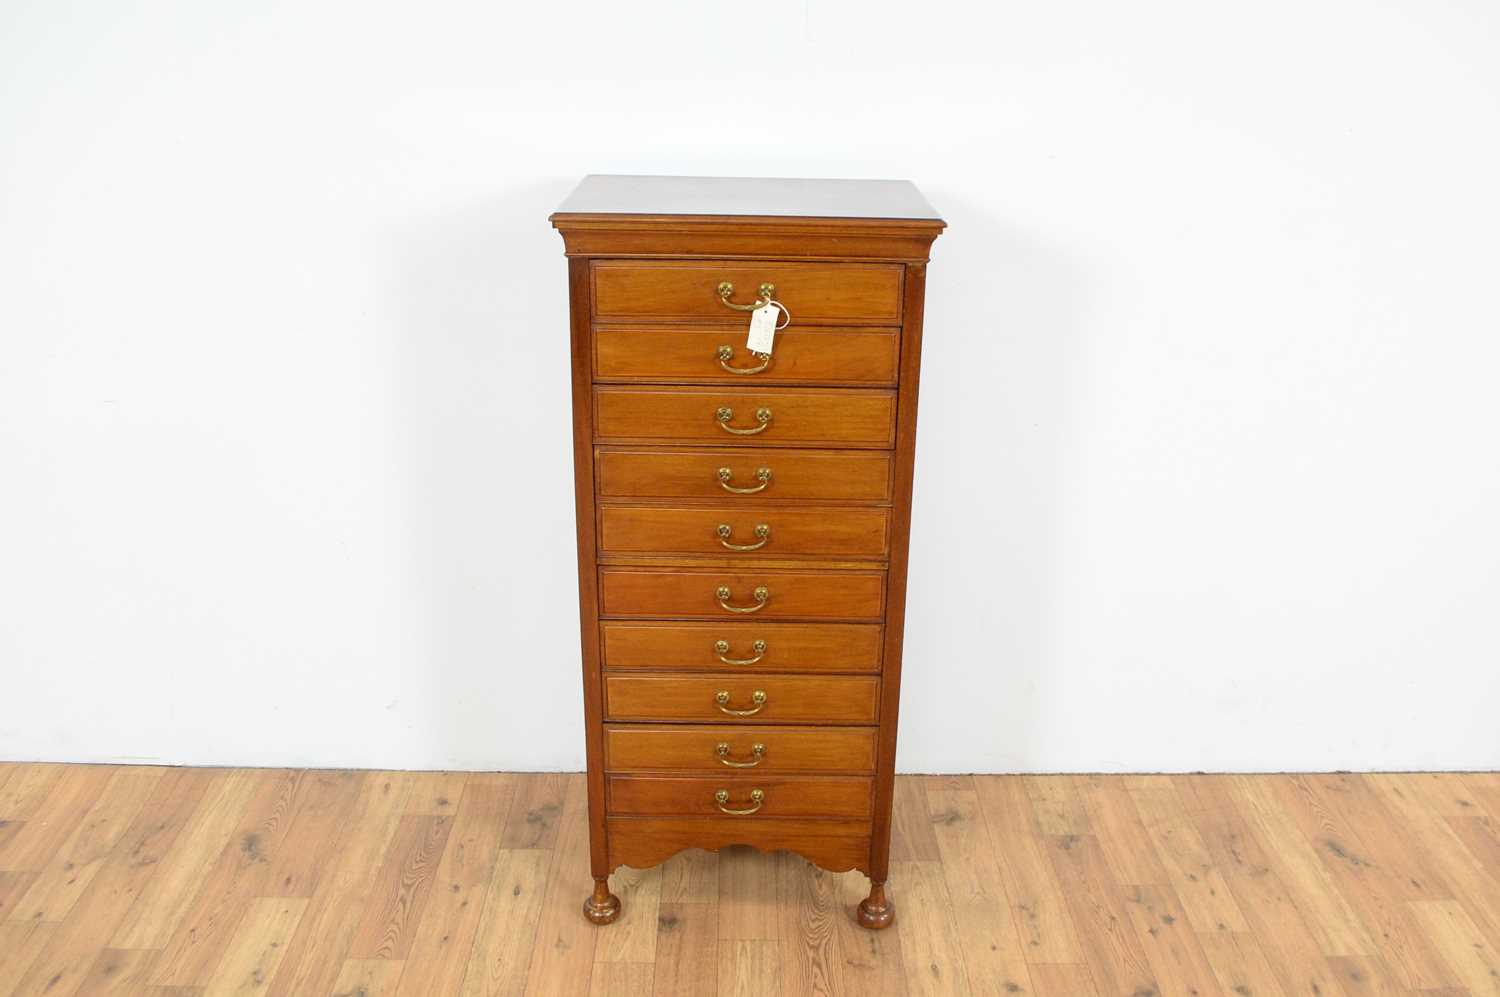 A 20th Century mahogany music cabinet with a glazed bookcase - Image 5 of 7